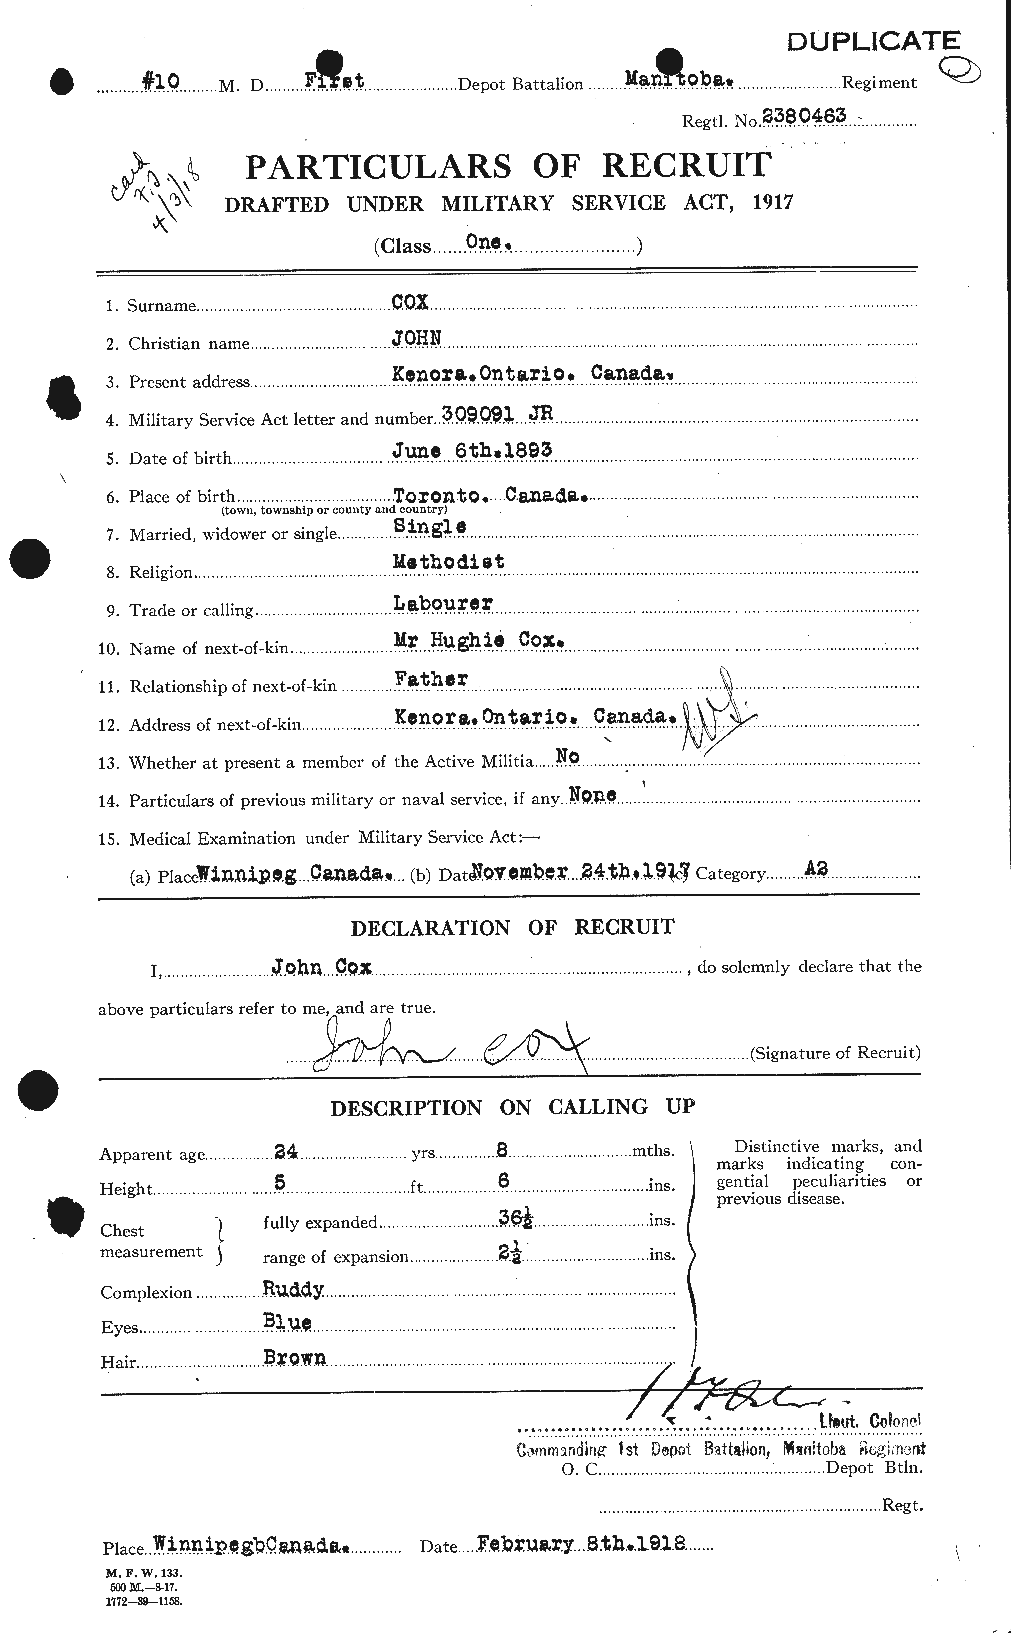 Personnel Records of the First World War - CEF 058964a